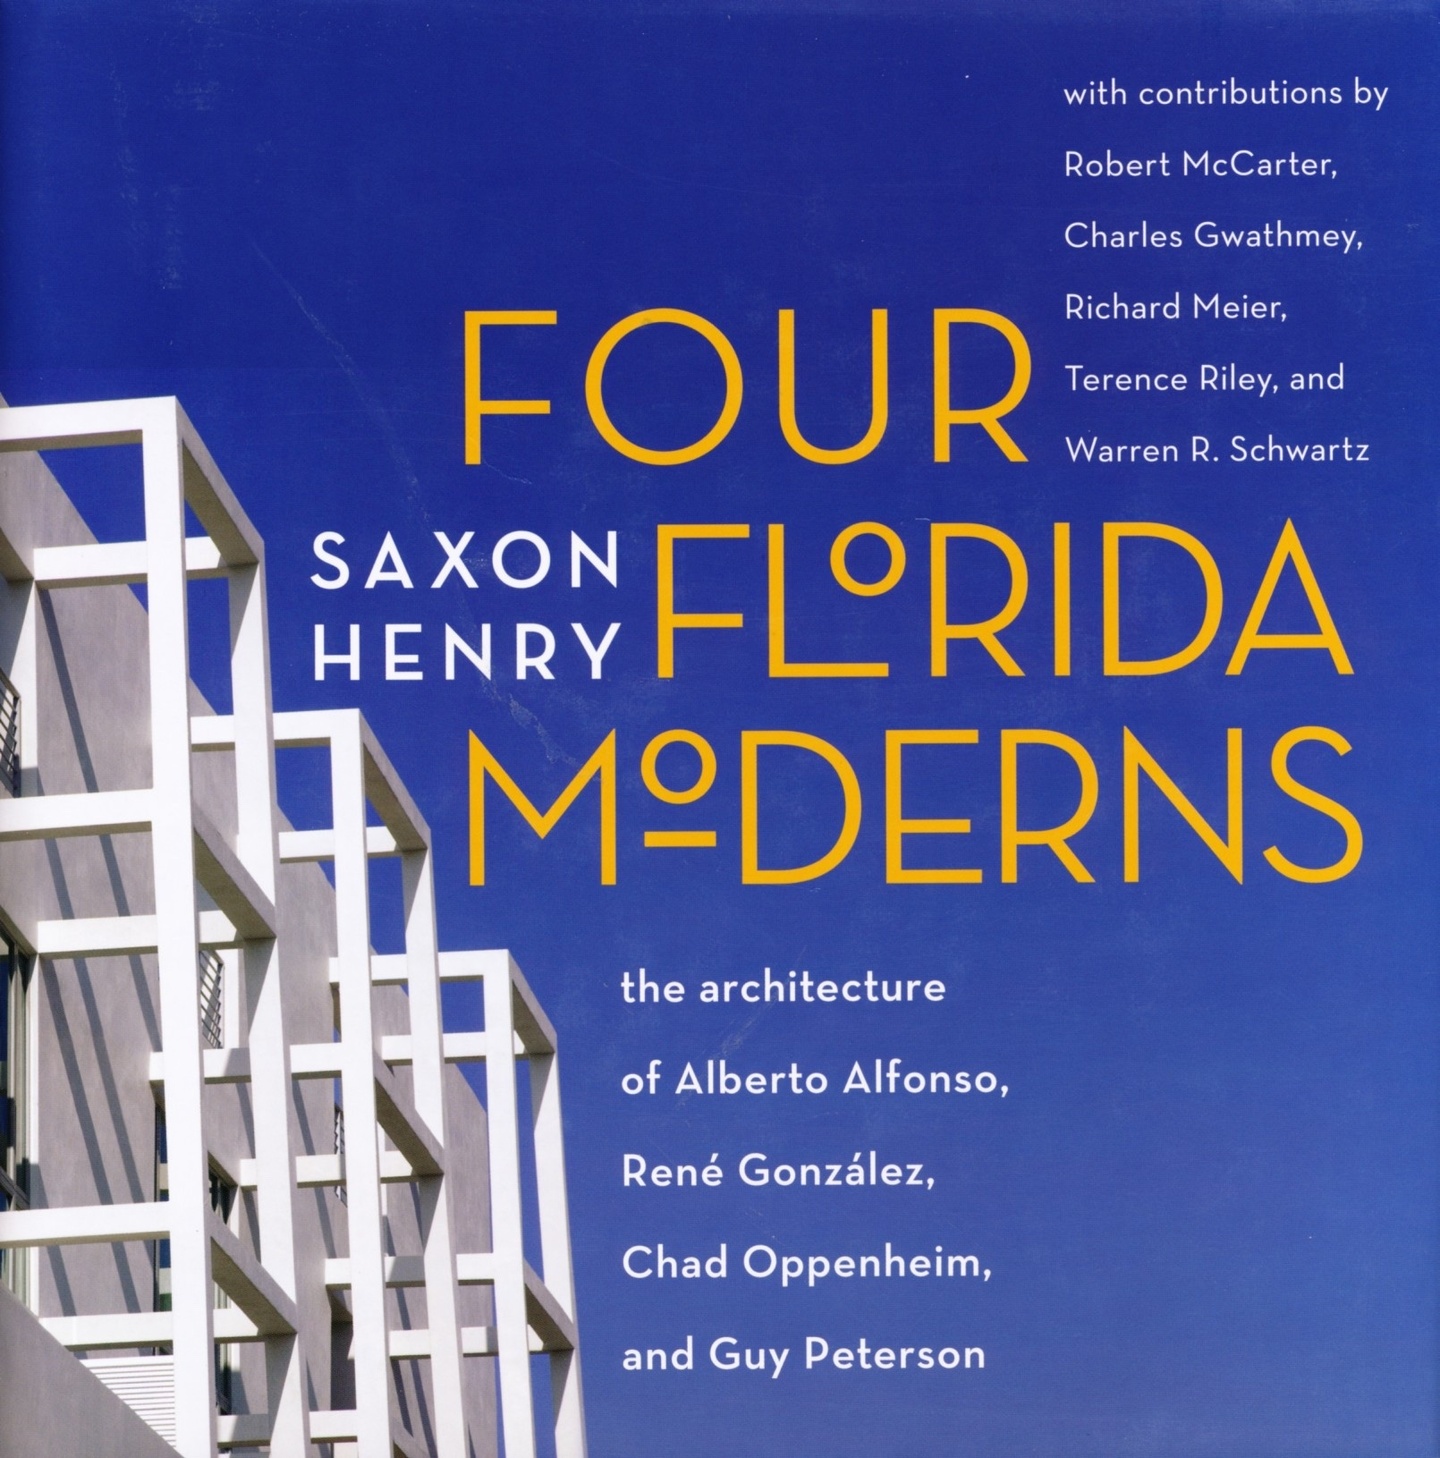 Cover of Four Florida Moderns, with a blue background an white geometric feature to the left.